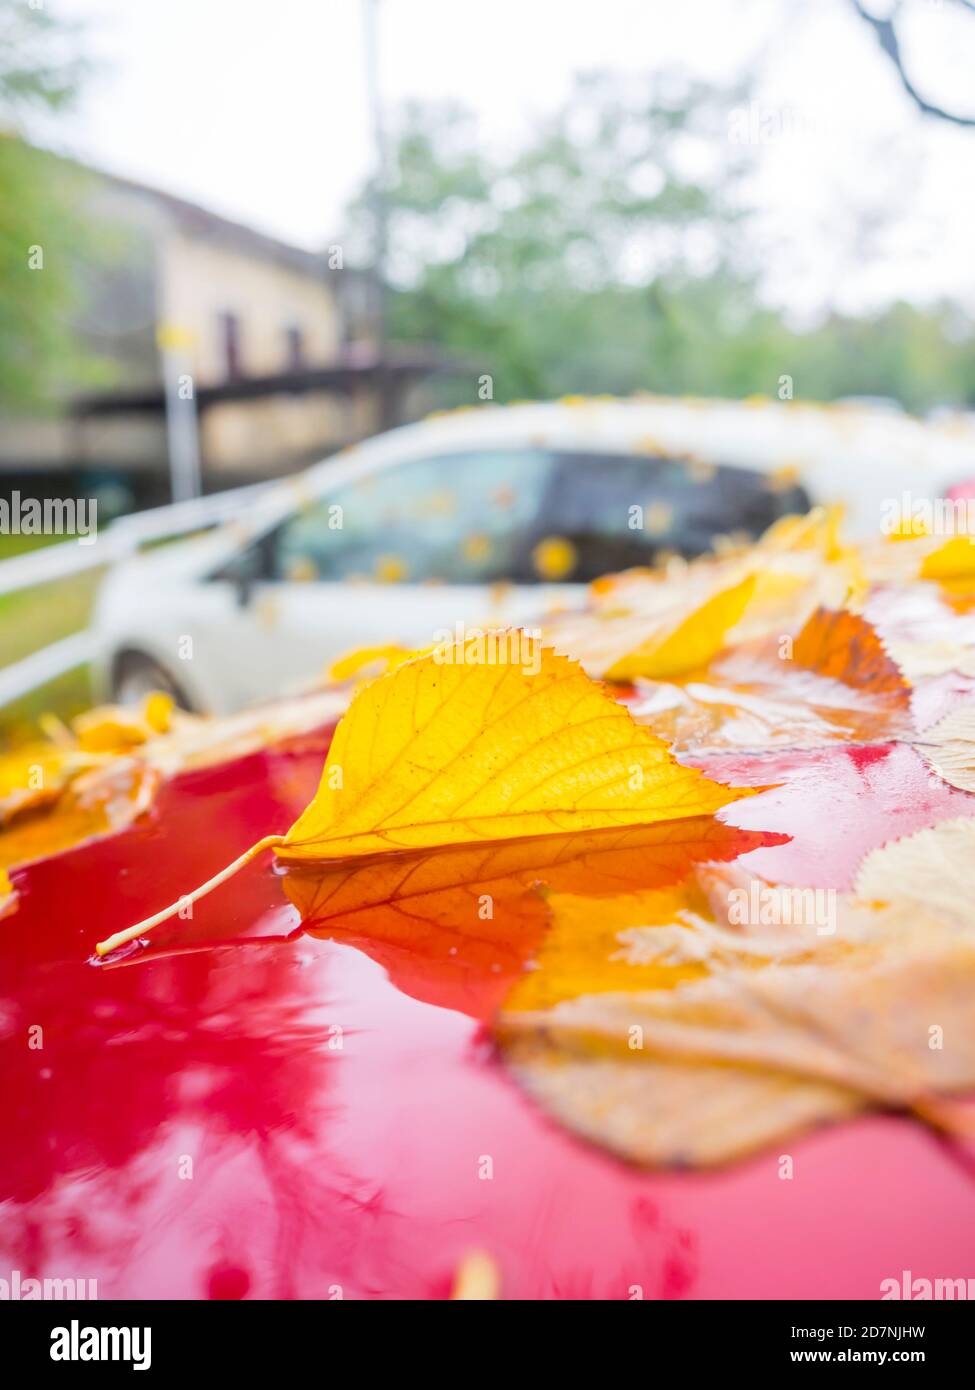 Fallen linden leaves erected leaf isolated closeup close-up view on atop Red parked car vehicle Autumnal Autumn Fall season Stock Photo